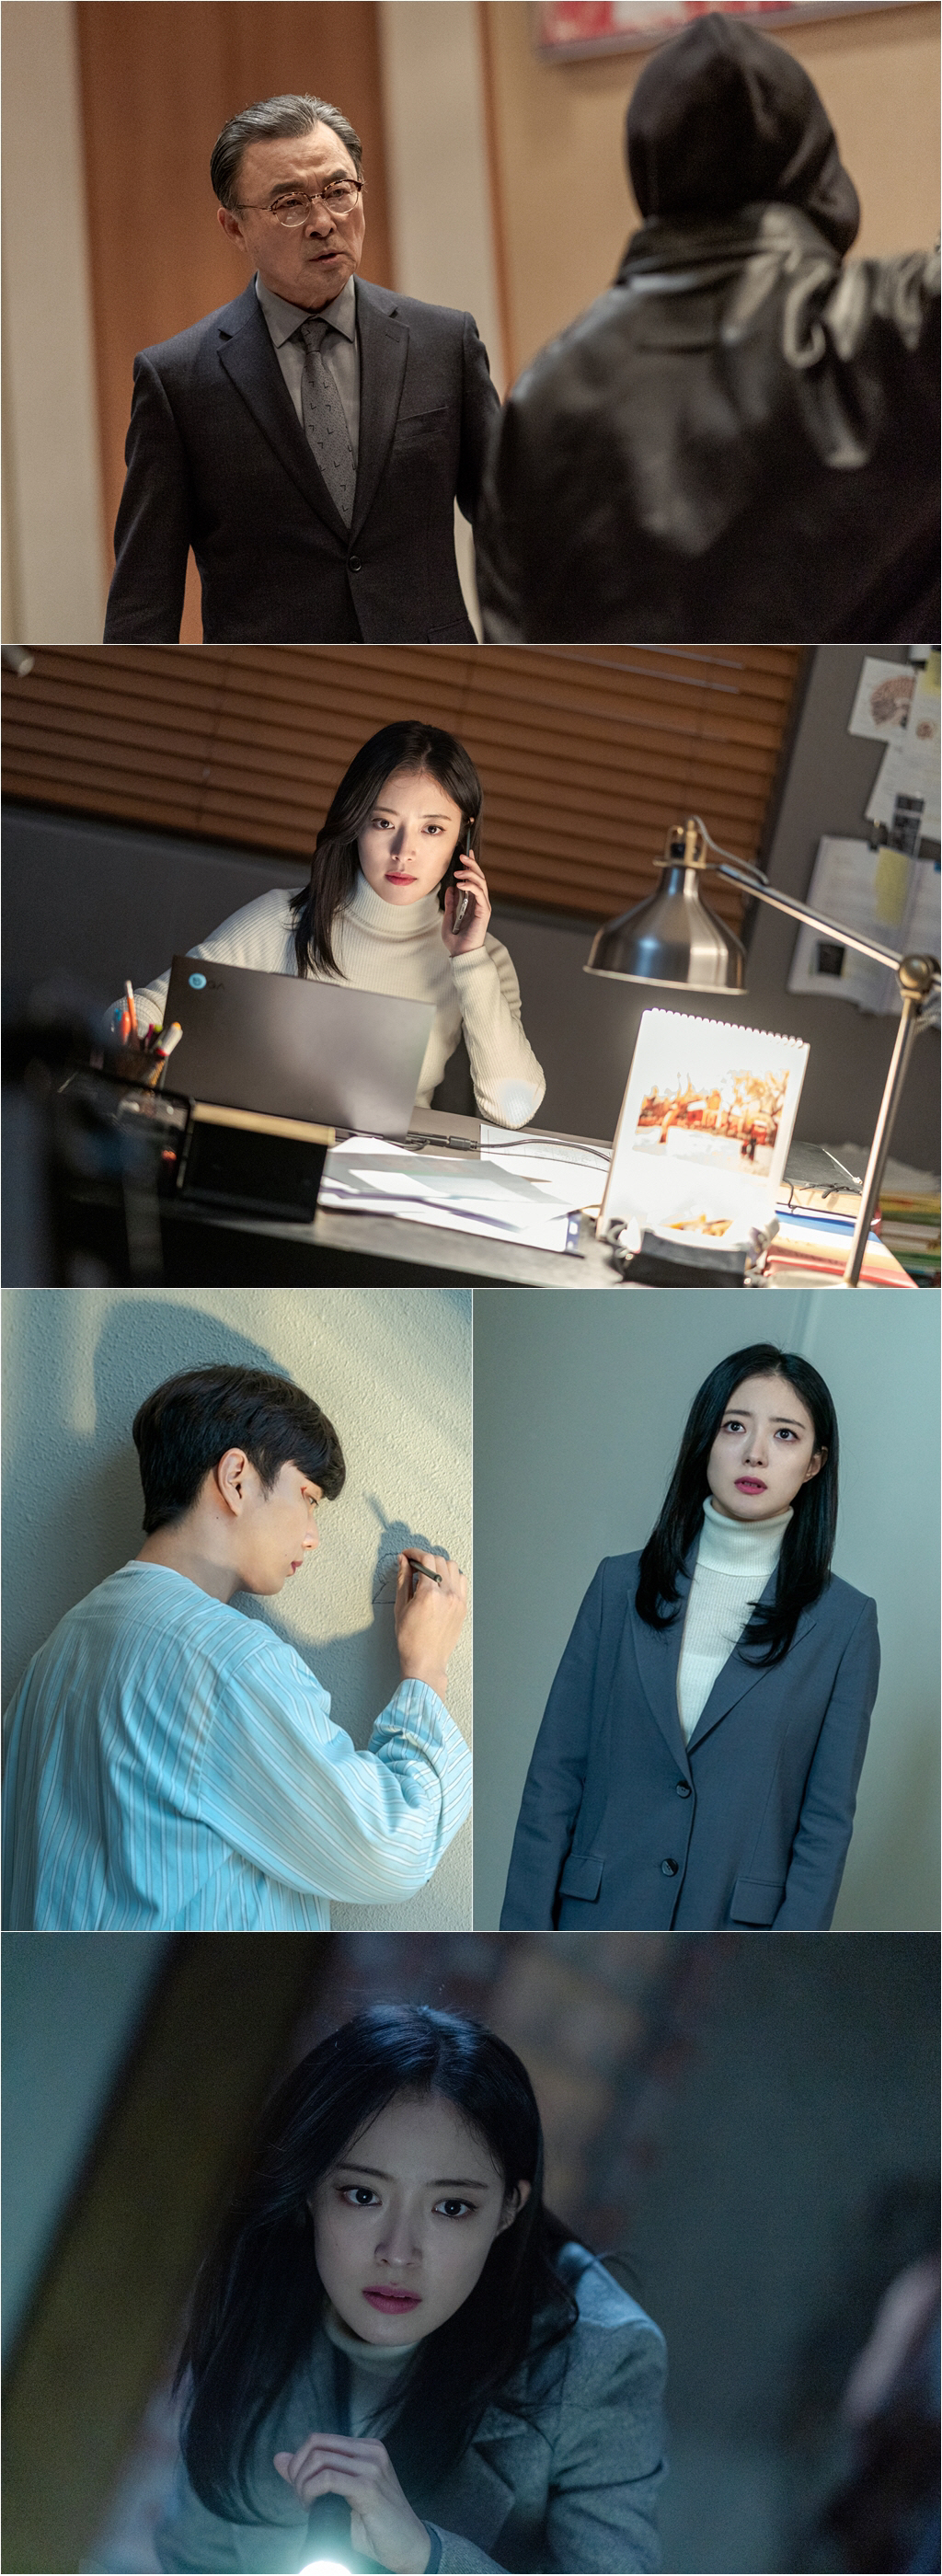 The secret behind the scenes is revealed with the performance of Memoir of Warlist Lee Se-young.TVNs Drama Memoir of Warlist (played by Ahn Do-ha, Hwang Ha-na and directed by Kim Hwi-jae, Oh Seung-yeol) will reveal the scene of a tense investigation by Profiler One lineready (Lee Se-young) who is chasing superpower crimes on the 24th.One line already has solved unsolved cases through genius profiling, and the first to capture the traces of serial kidnapping murders is also one line already.His persistent persistence and keen insights, as well as his eager commitment to catching the real criminal, caught viewers at once with his superpower Detective Camellia (Yoo Seung-ho) and another charm.In the last broadcast, the heretic owner Park Ki-dan (Lee Seung-chul) was killed. Even the memory of witnesses disappeared as if it had been cut off with a razor blade.Camellia and One line ready facing the impossible reality raised Mystery even further, foreshadowing the blue.In the meantime, the public photos are expected to play a role in One line ready against the Mystery incident that I have never experienced before.If Camellia had brought the identity of the real criminal Park to the surface of the water, One lineready had found evidence that was almost buried and moved to be legally effective.Park Gi-dan, who was killed by a man in question before his condemnation. The identity of the question threatening him in the picture stimulates curiosity.In particular, no witnesses can remember the killers face, not even the killers screen. The memory of Camellias Memory scans is not readable.One line algorithm, which quickly judges the case and finds the key to solving the case, further amplifies the curiosity of what clues to find.Camellia in her patient suit and One line alert in the ensuing photo are also interesting: the appearance of a super-powered criminal is like a declaration of war.One line ready will aim at a suspicious arrow for superpower Detective Camellia.One line algorithm, which has begun tracking Camellias suspicious behavior, adds to the question of what truth will be found.It is noteworthy whether the sharp profiling of One lineready will be able to catch the questioner who foresaw the superpower crime.Memoir of Warlist production team said, Mystery chain Killer Easy finally appeared in front of Camellia and One line ready.The shocking past of One line ready is also expected to be revealed.This will be another key to solving the case, he said. Please watch the fierce and exciting performance of Camellia and One lineready, who have faced enemies that have not experienced before. On the other hand, the 5th TVN drama Memoir of Warlist will be broadcasted at 10:50 pm on the 25th.